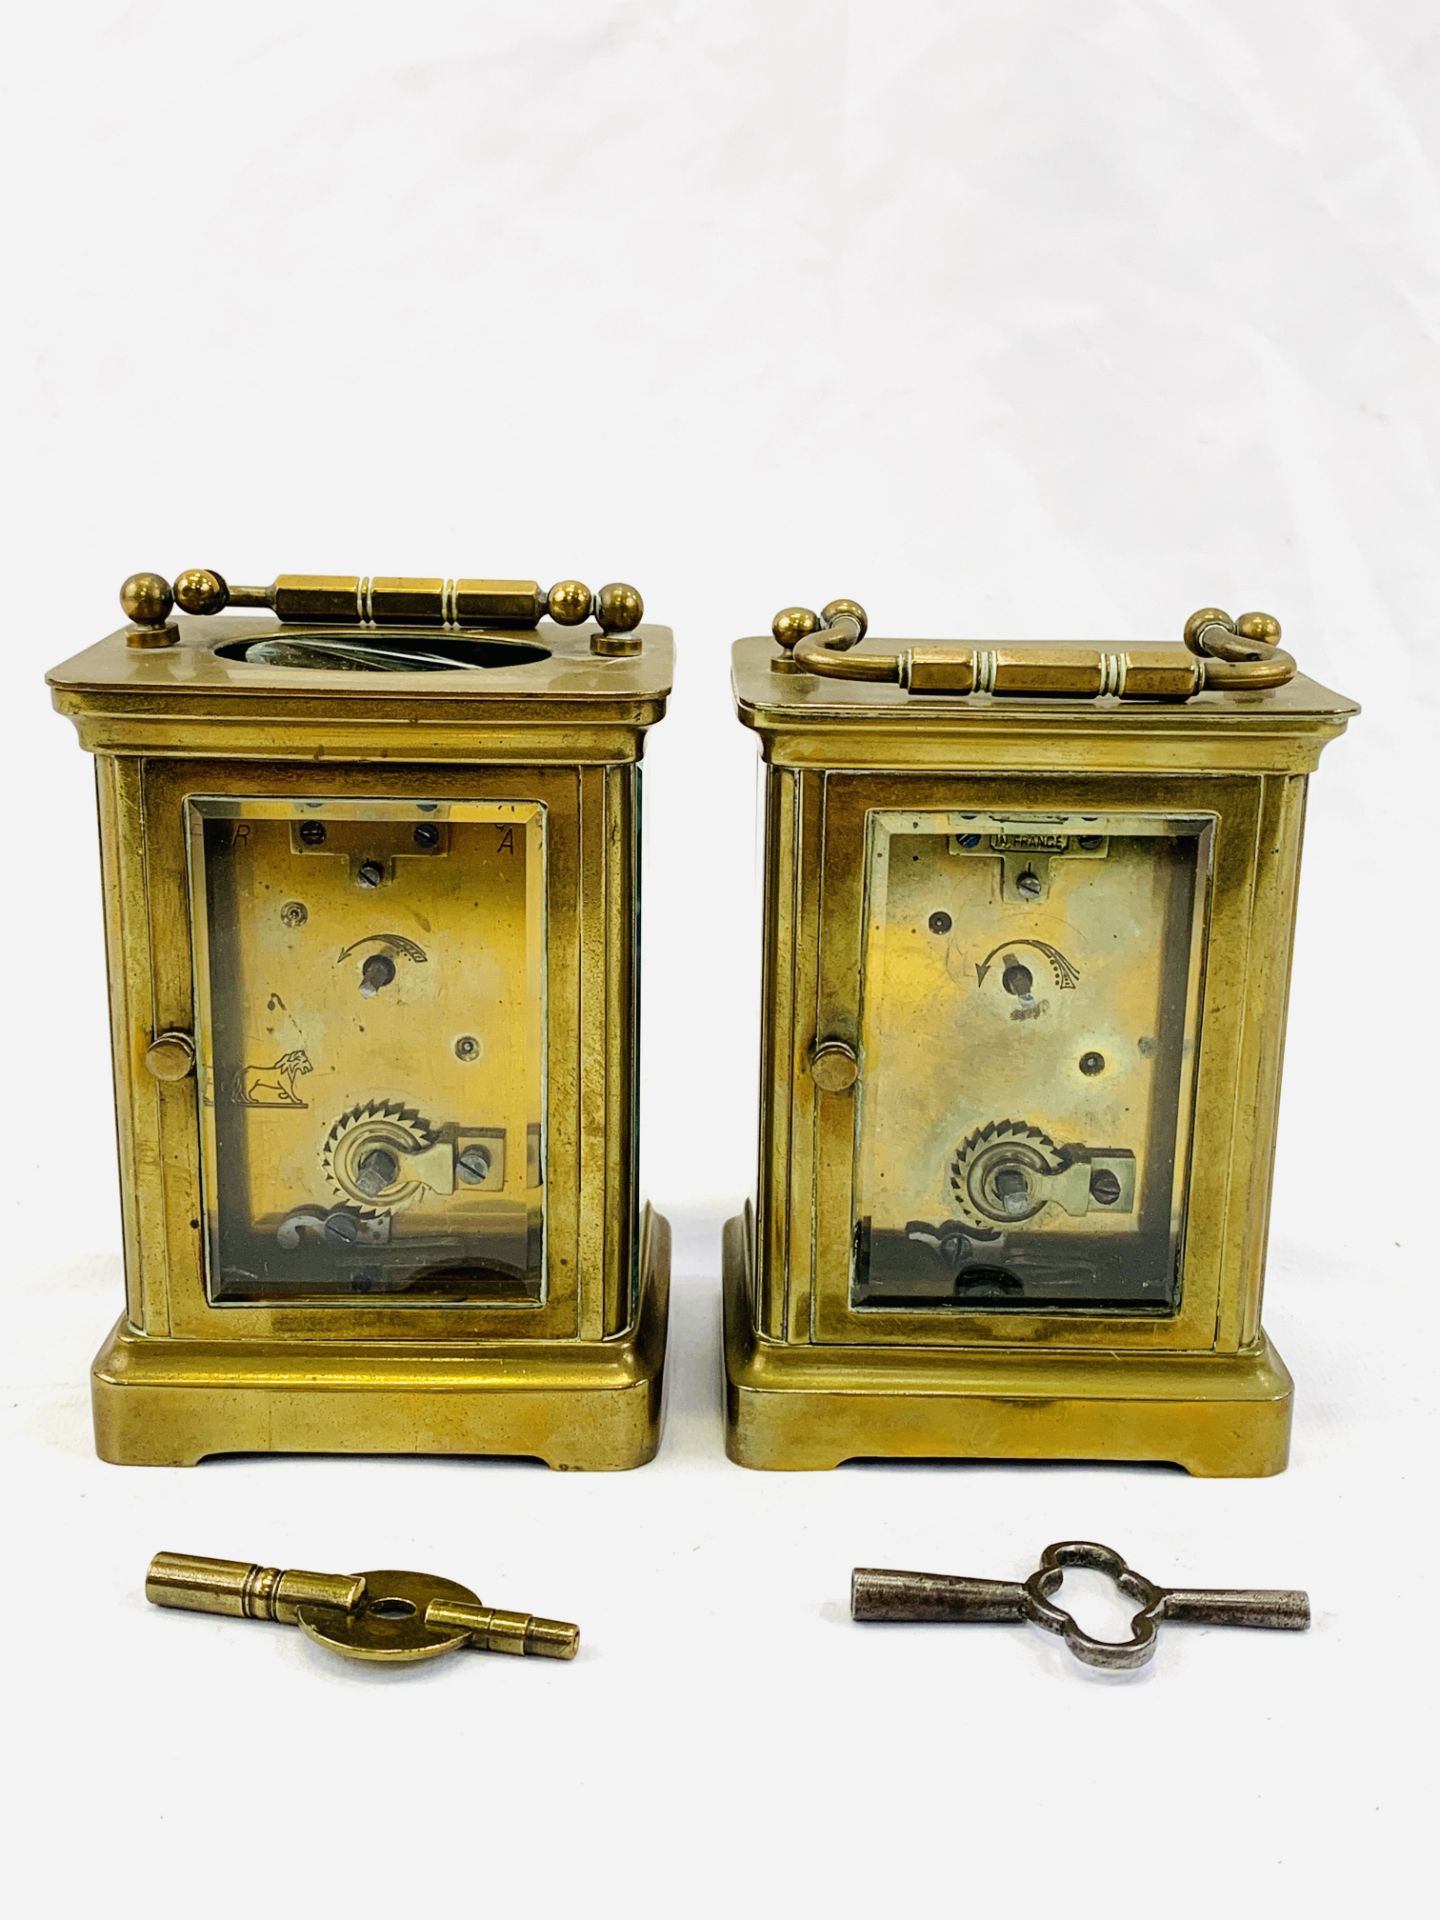 Two brass carriage clocks - Image 4 of 4